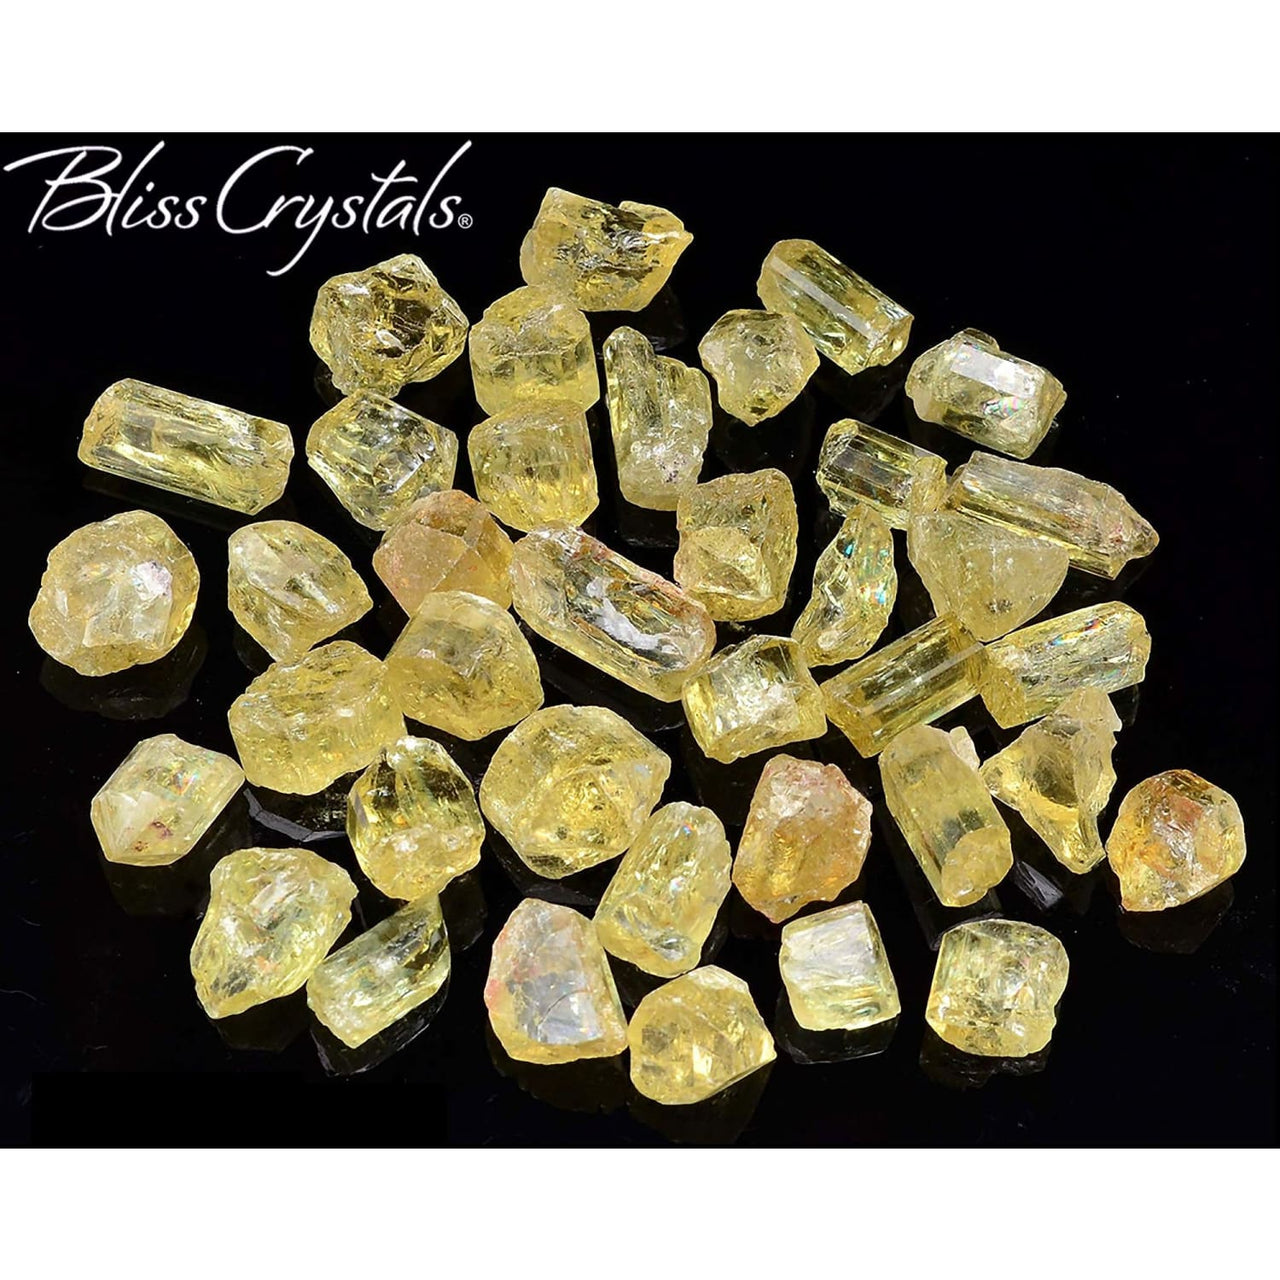 3 Small YELLOW APATITE (6-8 gm TW) Rough Mineral 